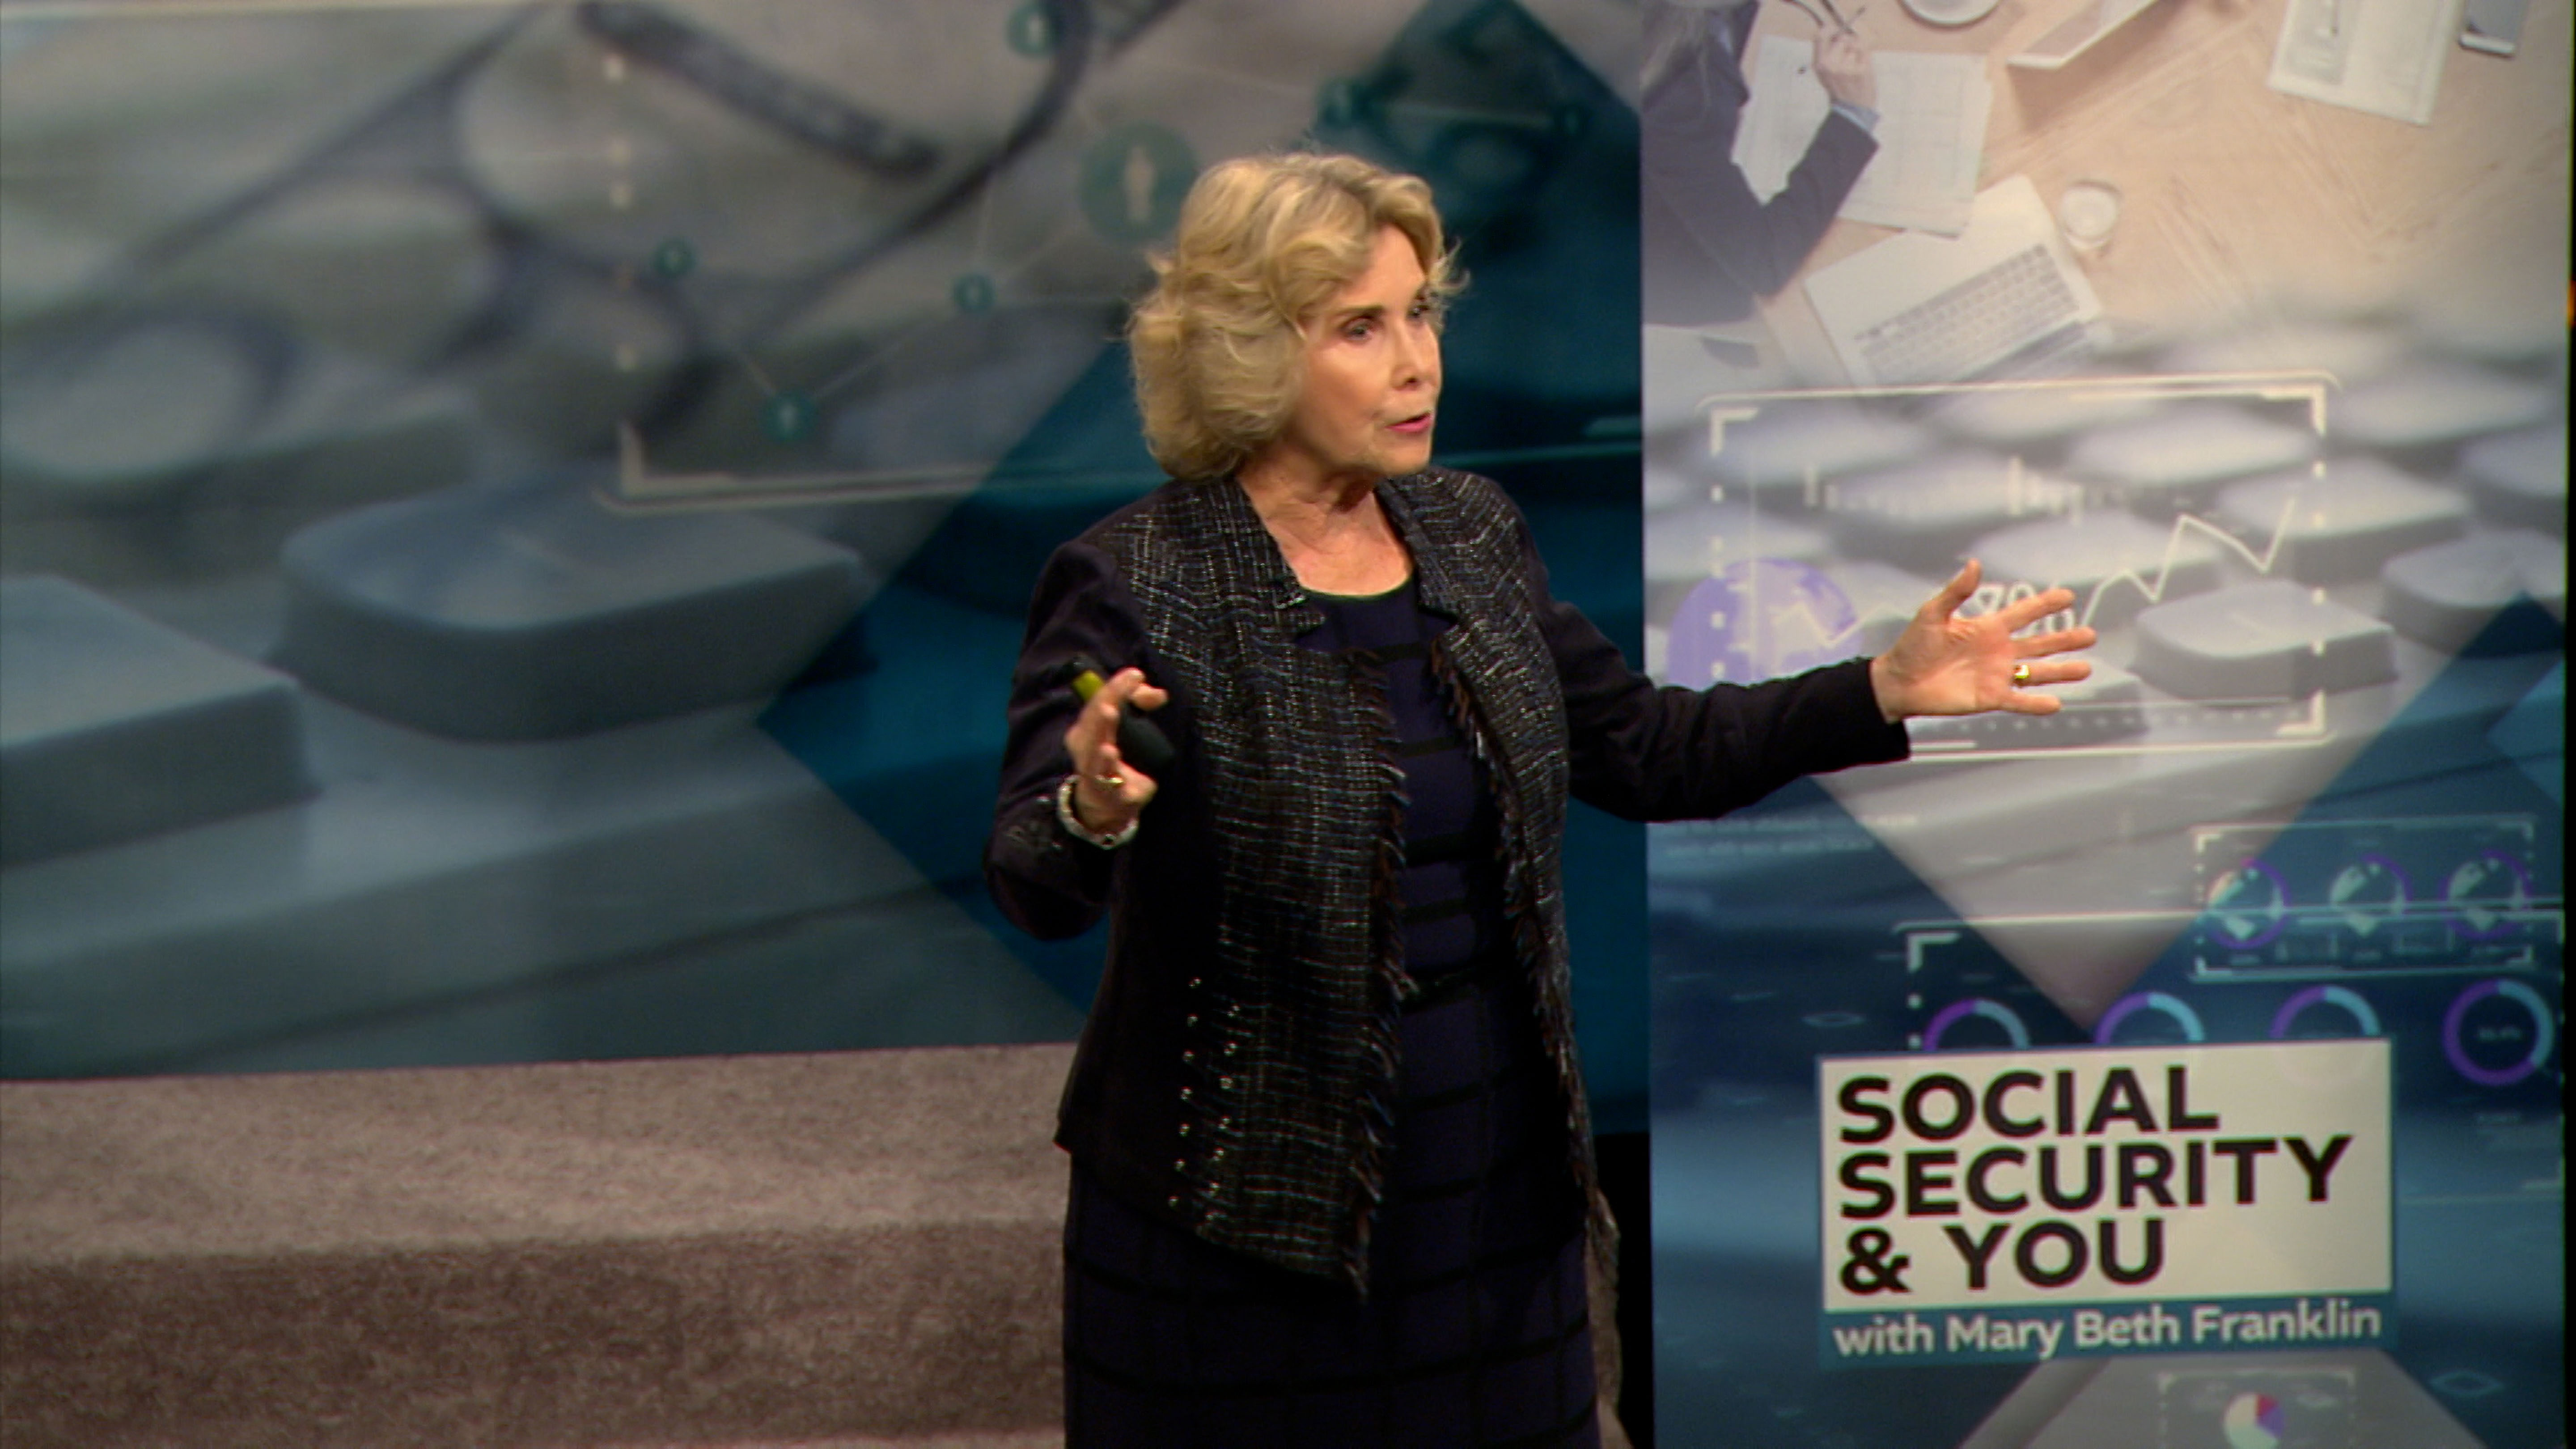 Check out Social Security & You with Mary Beth Franklin airing on a public television station near you!